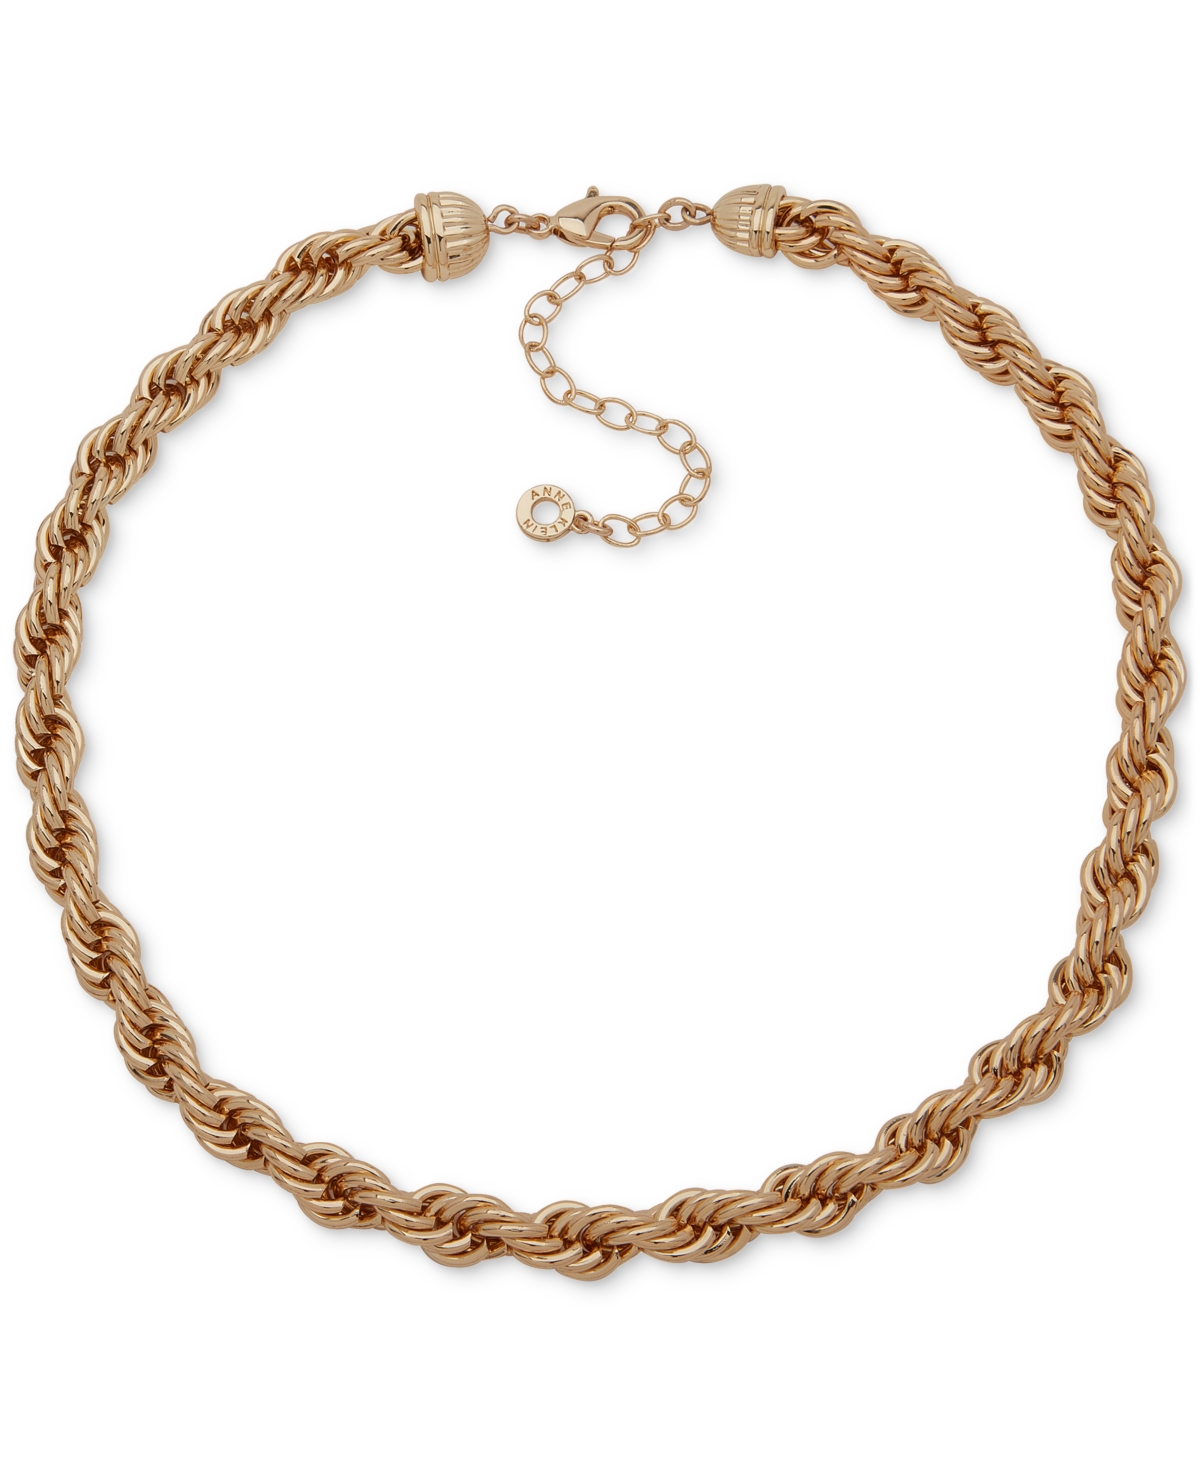 Anne Klein Gold-Tone Thick Rope Chain Collar Necklace, 16" + 3" extender